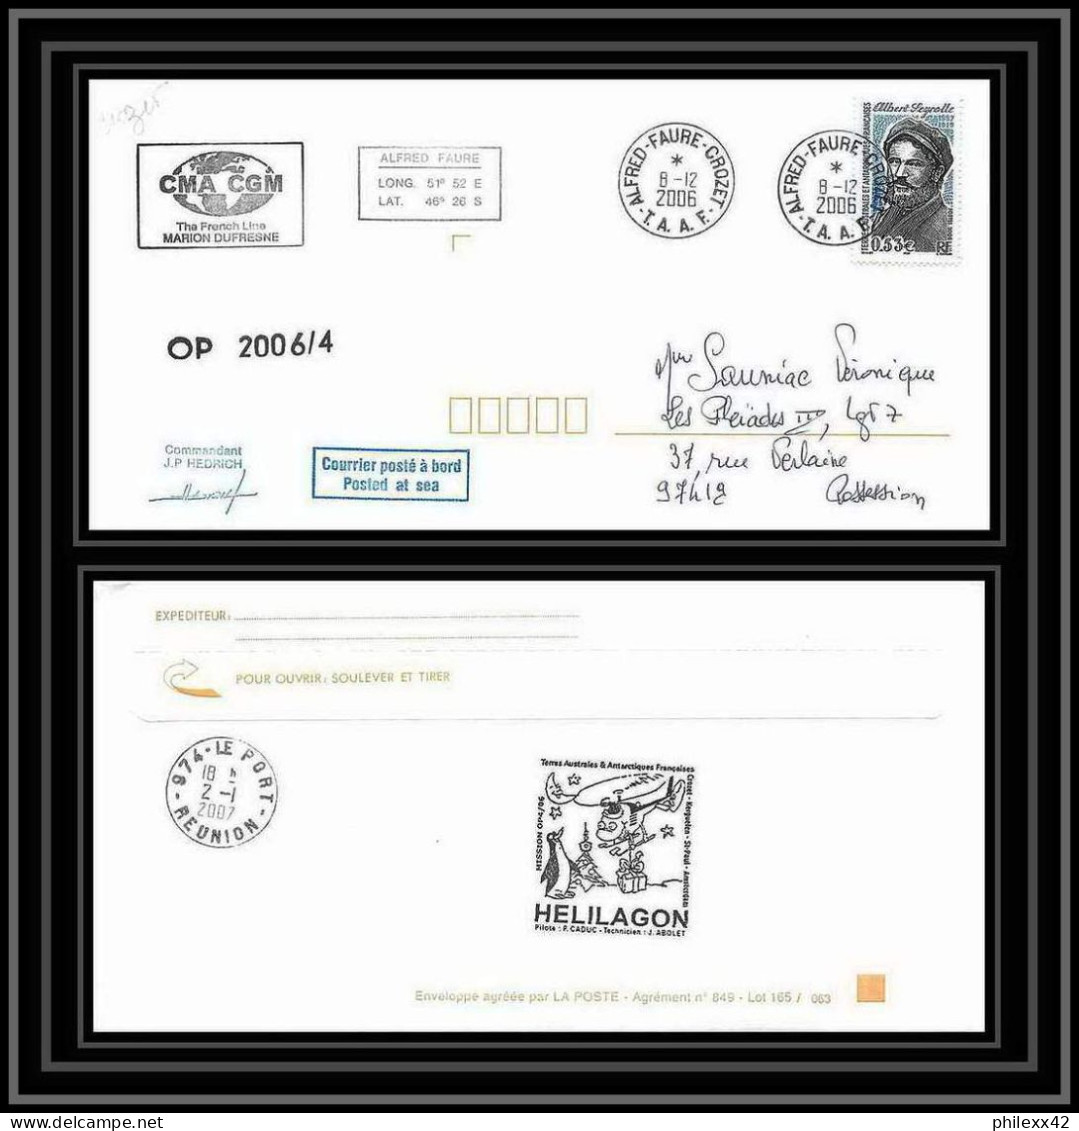 2627 ANTARCTIC Terres Australes TAAF Lettre Cover Dufresne 2 Signé Signed Op 2006/4 Crozet 8/12/2006 N°437 Helilagon - Hélicoptères